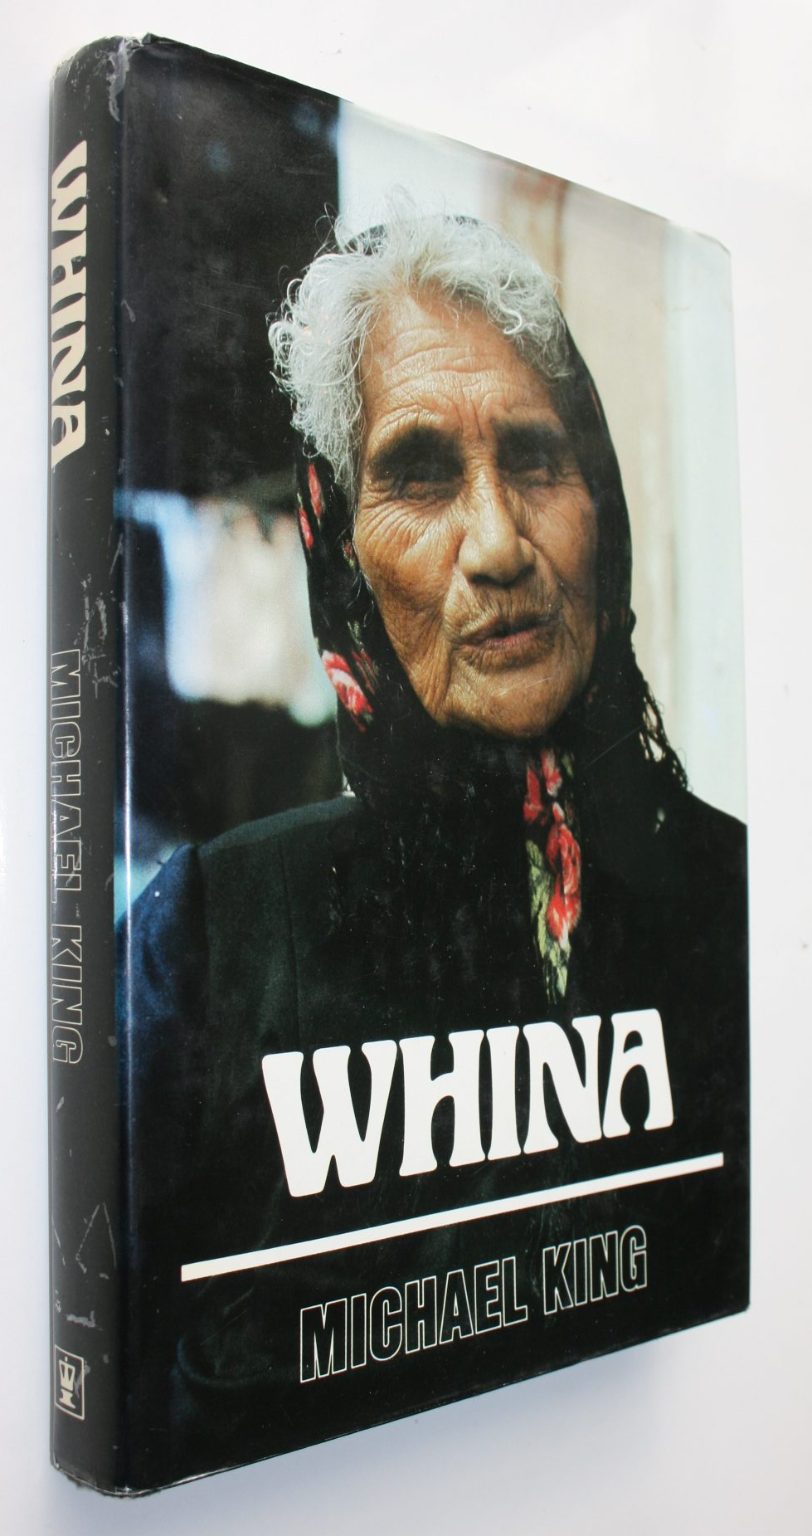 Whina A Biography of Whina Cooper By Michael King.